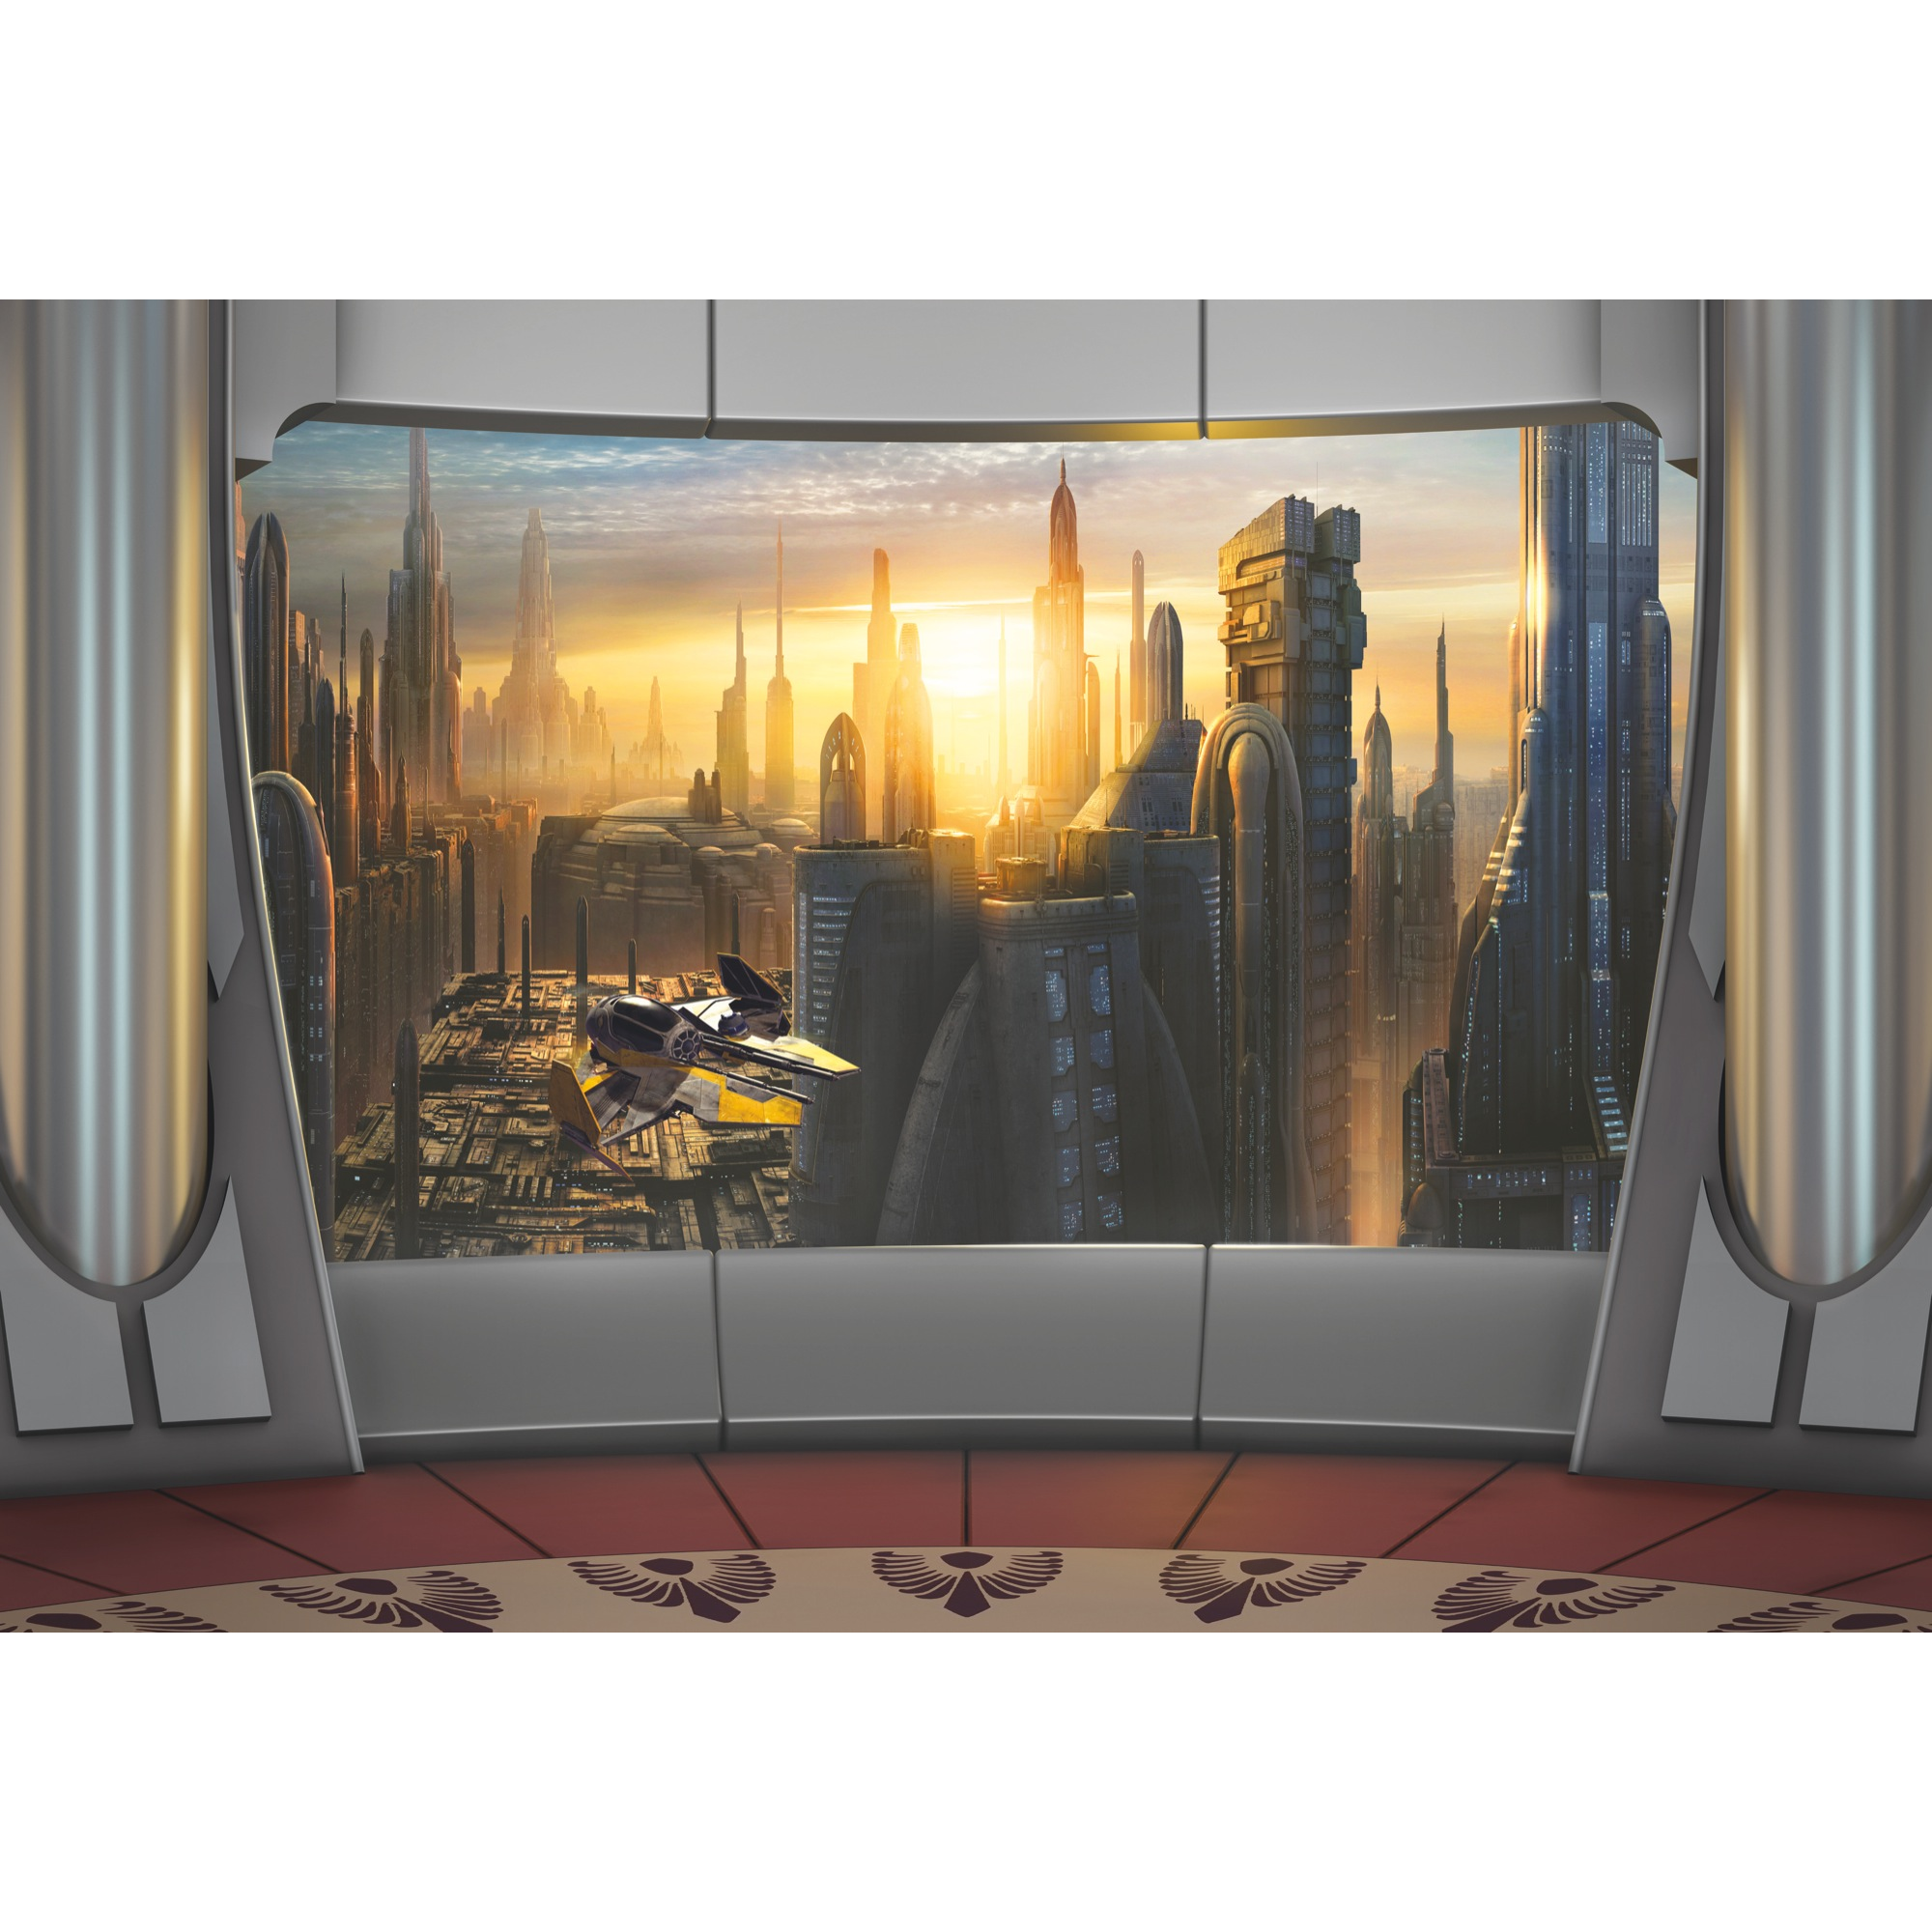 Fototapete 'Star Wars Coruscant View' 368 x 254 cm + product picture